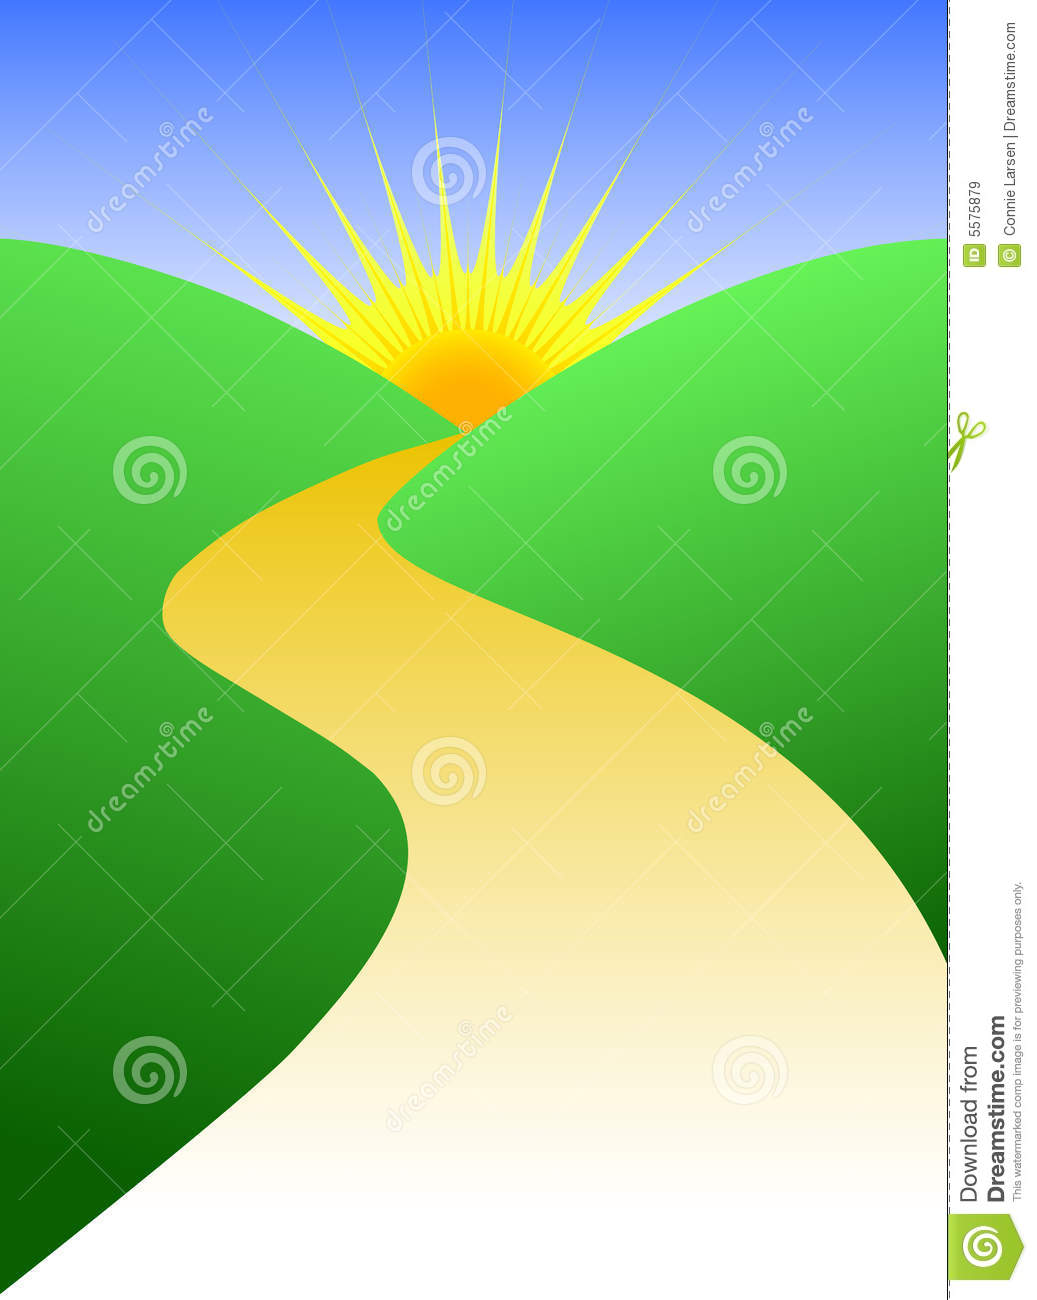 Stylized Illustration Of A Winding Golden Path Leading To A Horizon